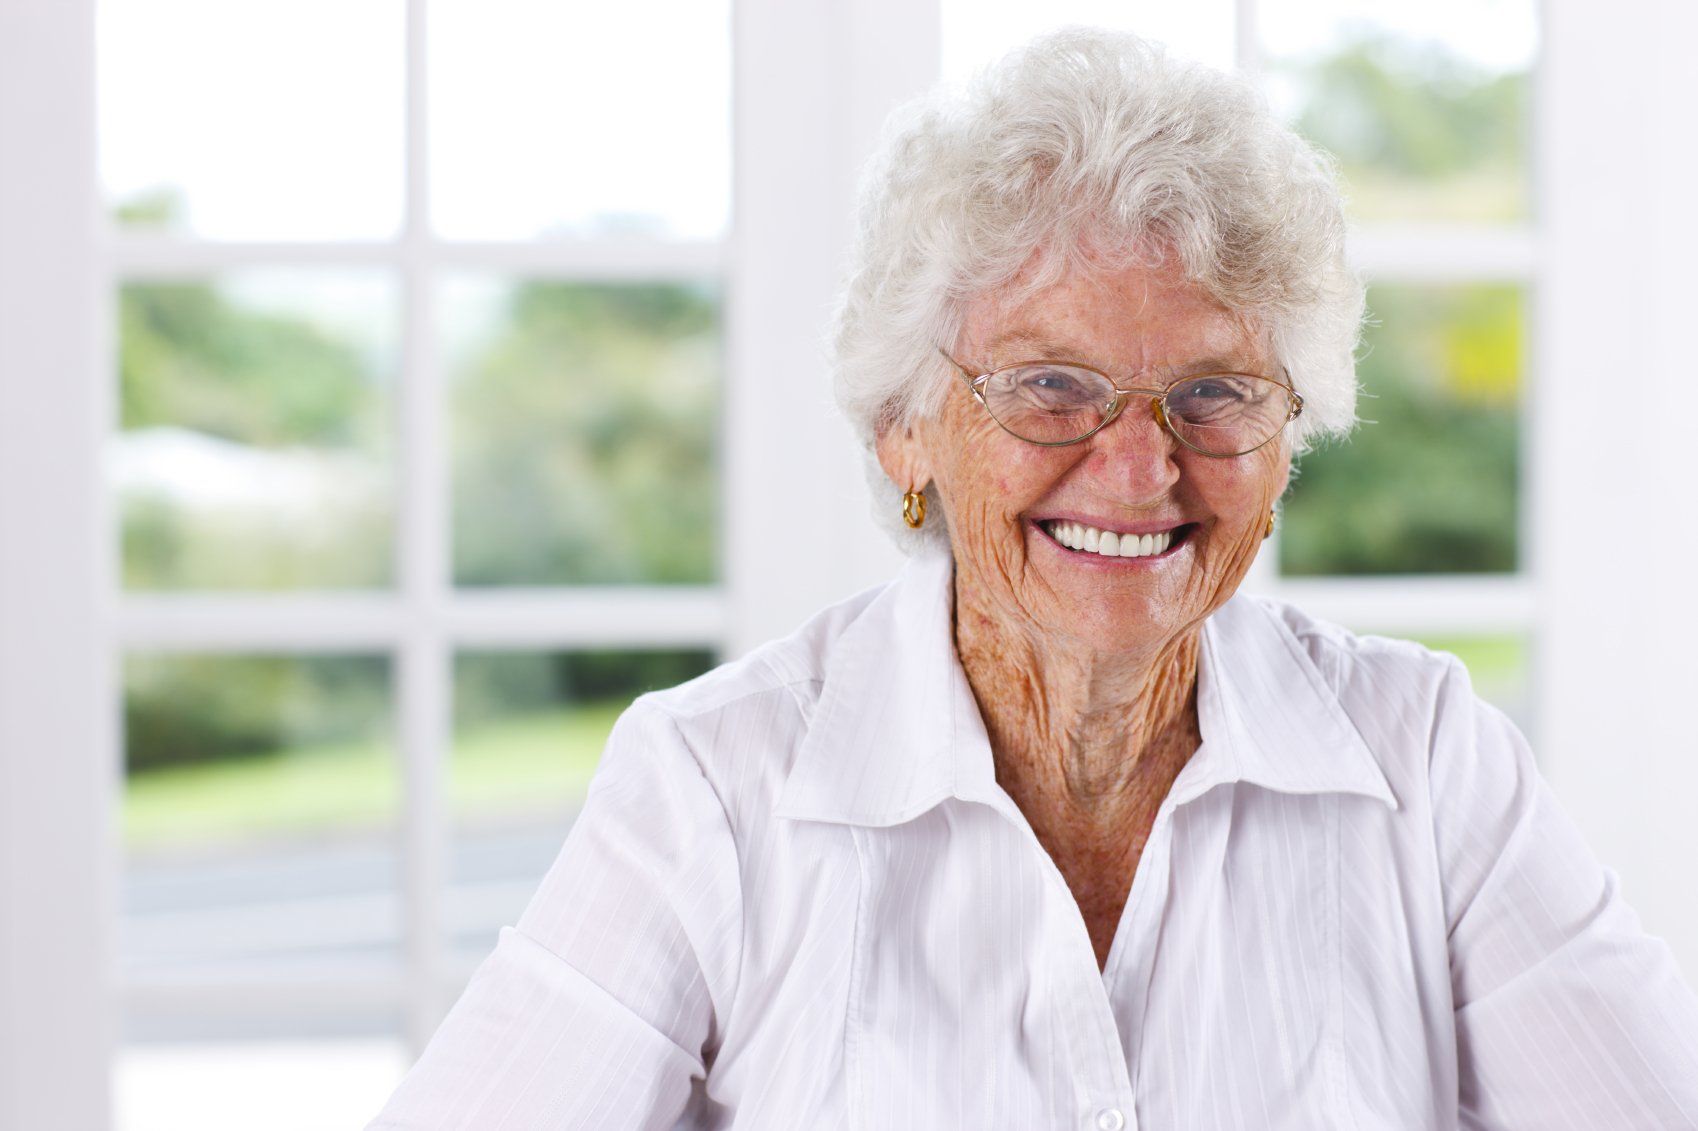 Elderly, grey-haired lady wearing a white shirt and striking a broad smile